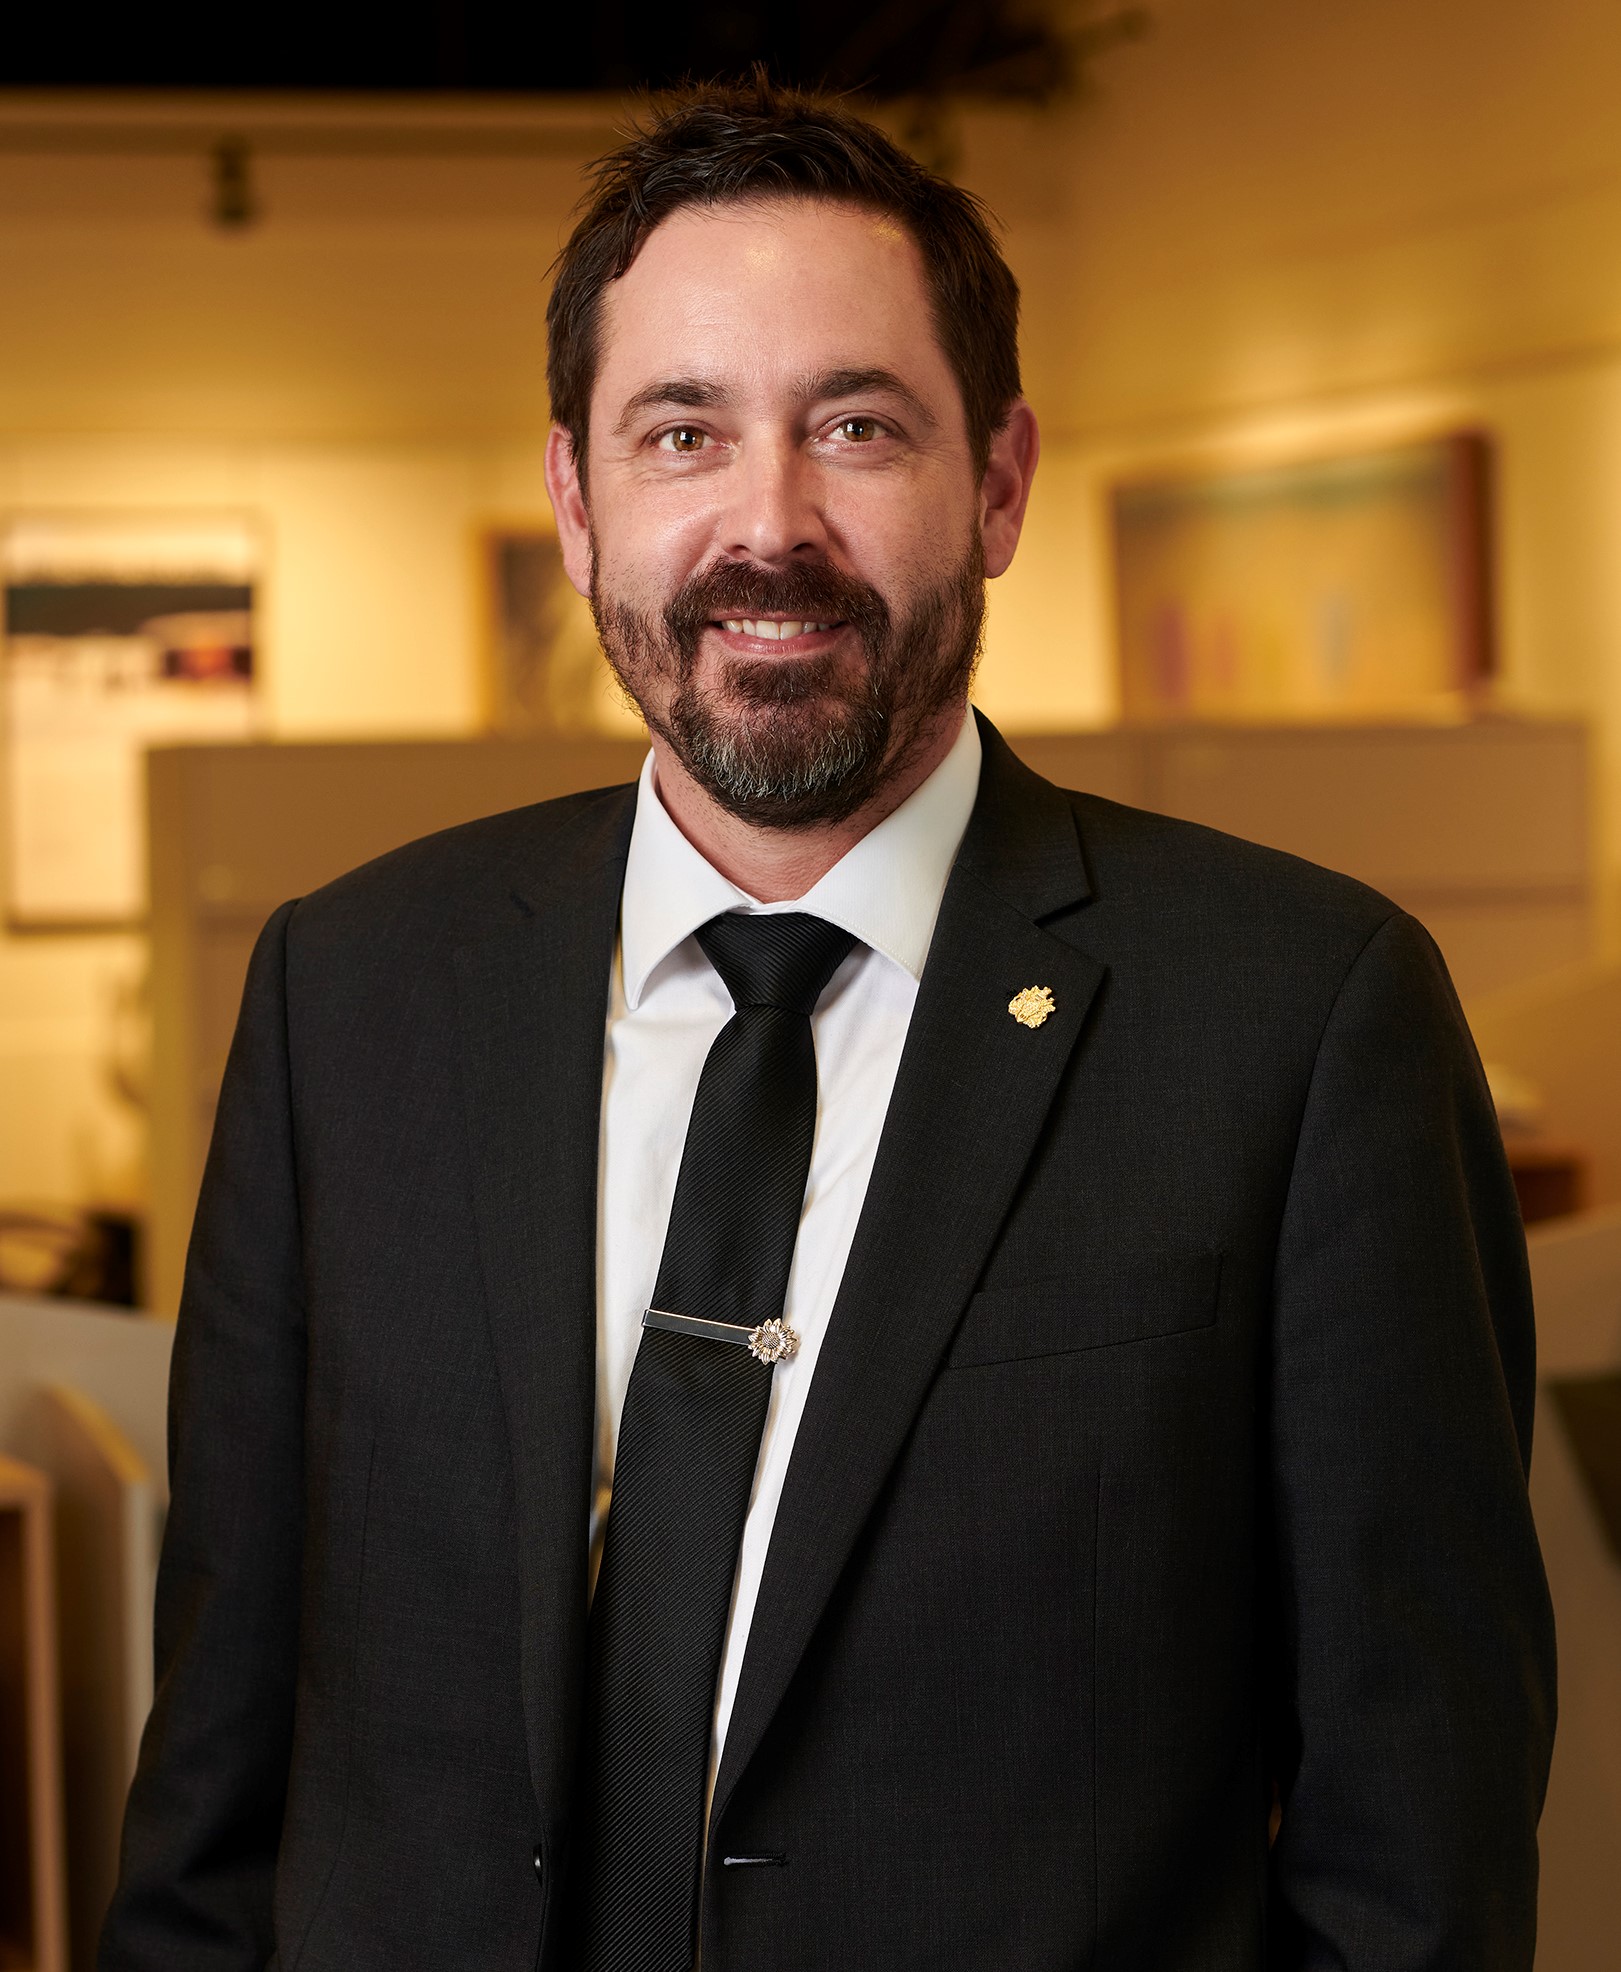 Shawn Blackman - Tall, white male with brown hair and a beard  wearing a black suit. He is  standing in an office with a blurred background smiling.